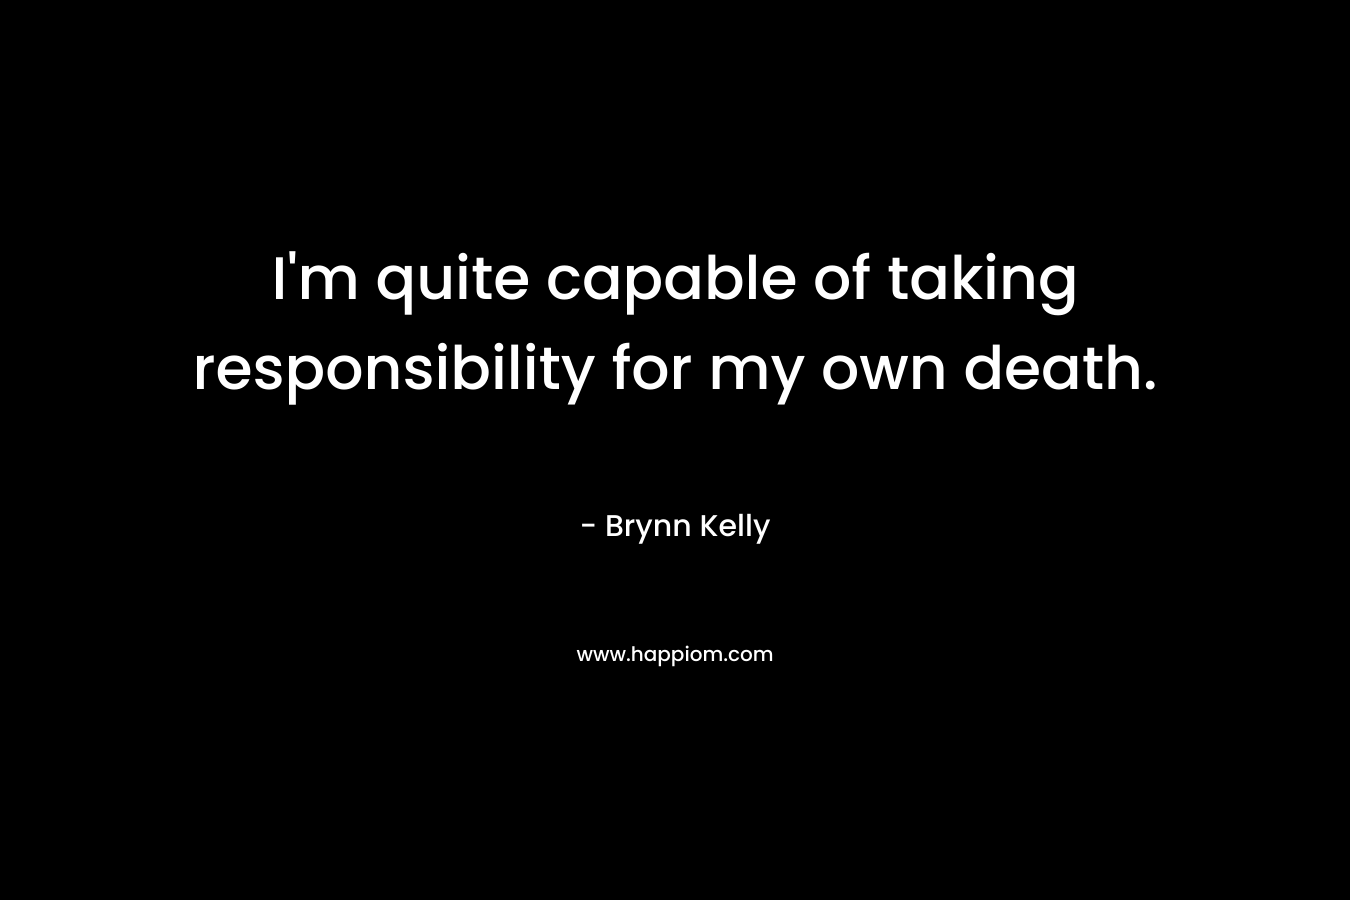 I’m quite capable of taking responsibility for my own death. – Brynn Kelly